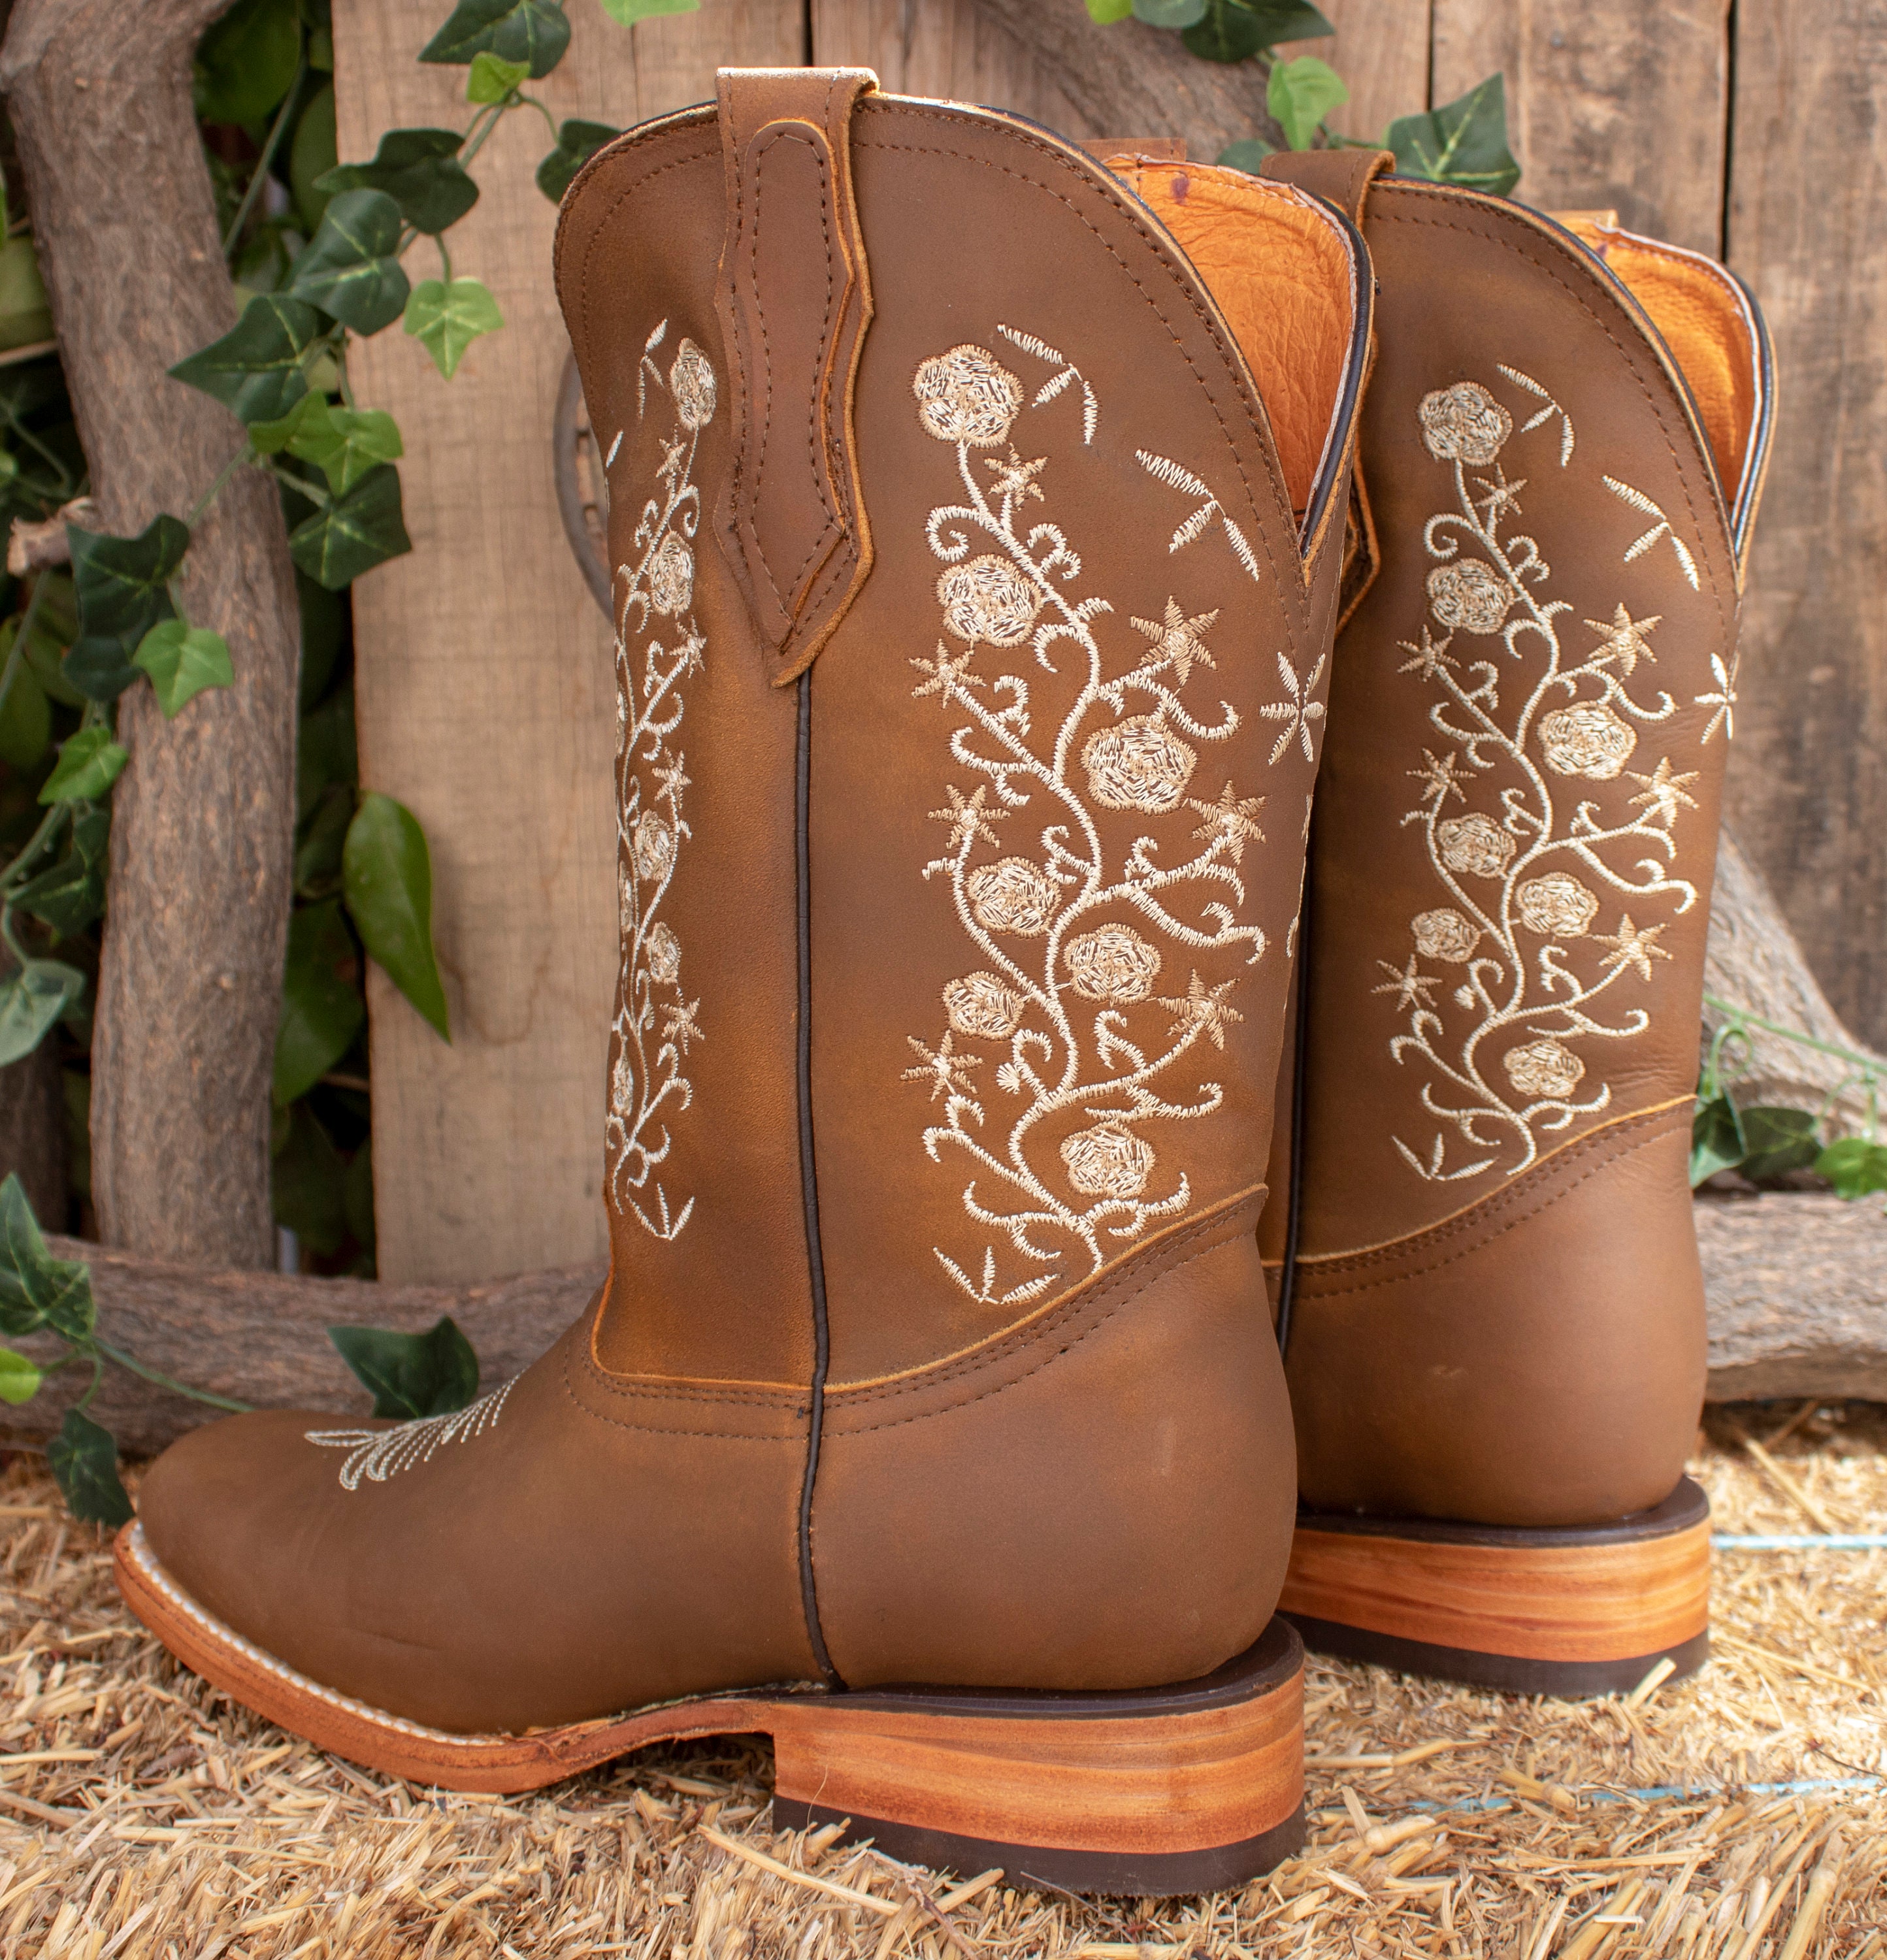 WOMENS Cowgirl WIDE CALF Cowboy Square Toe Leather Embroidered Boots -   Canada